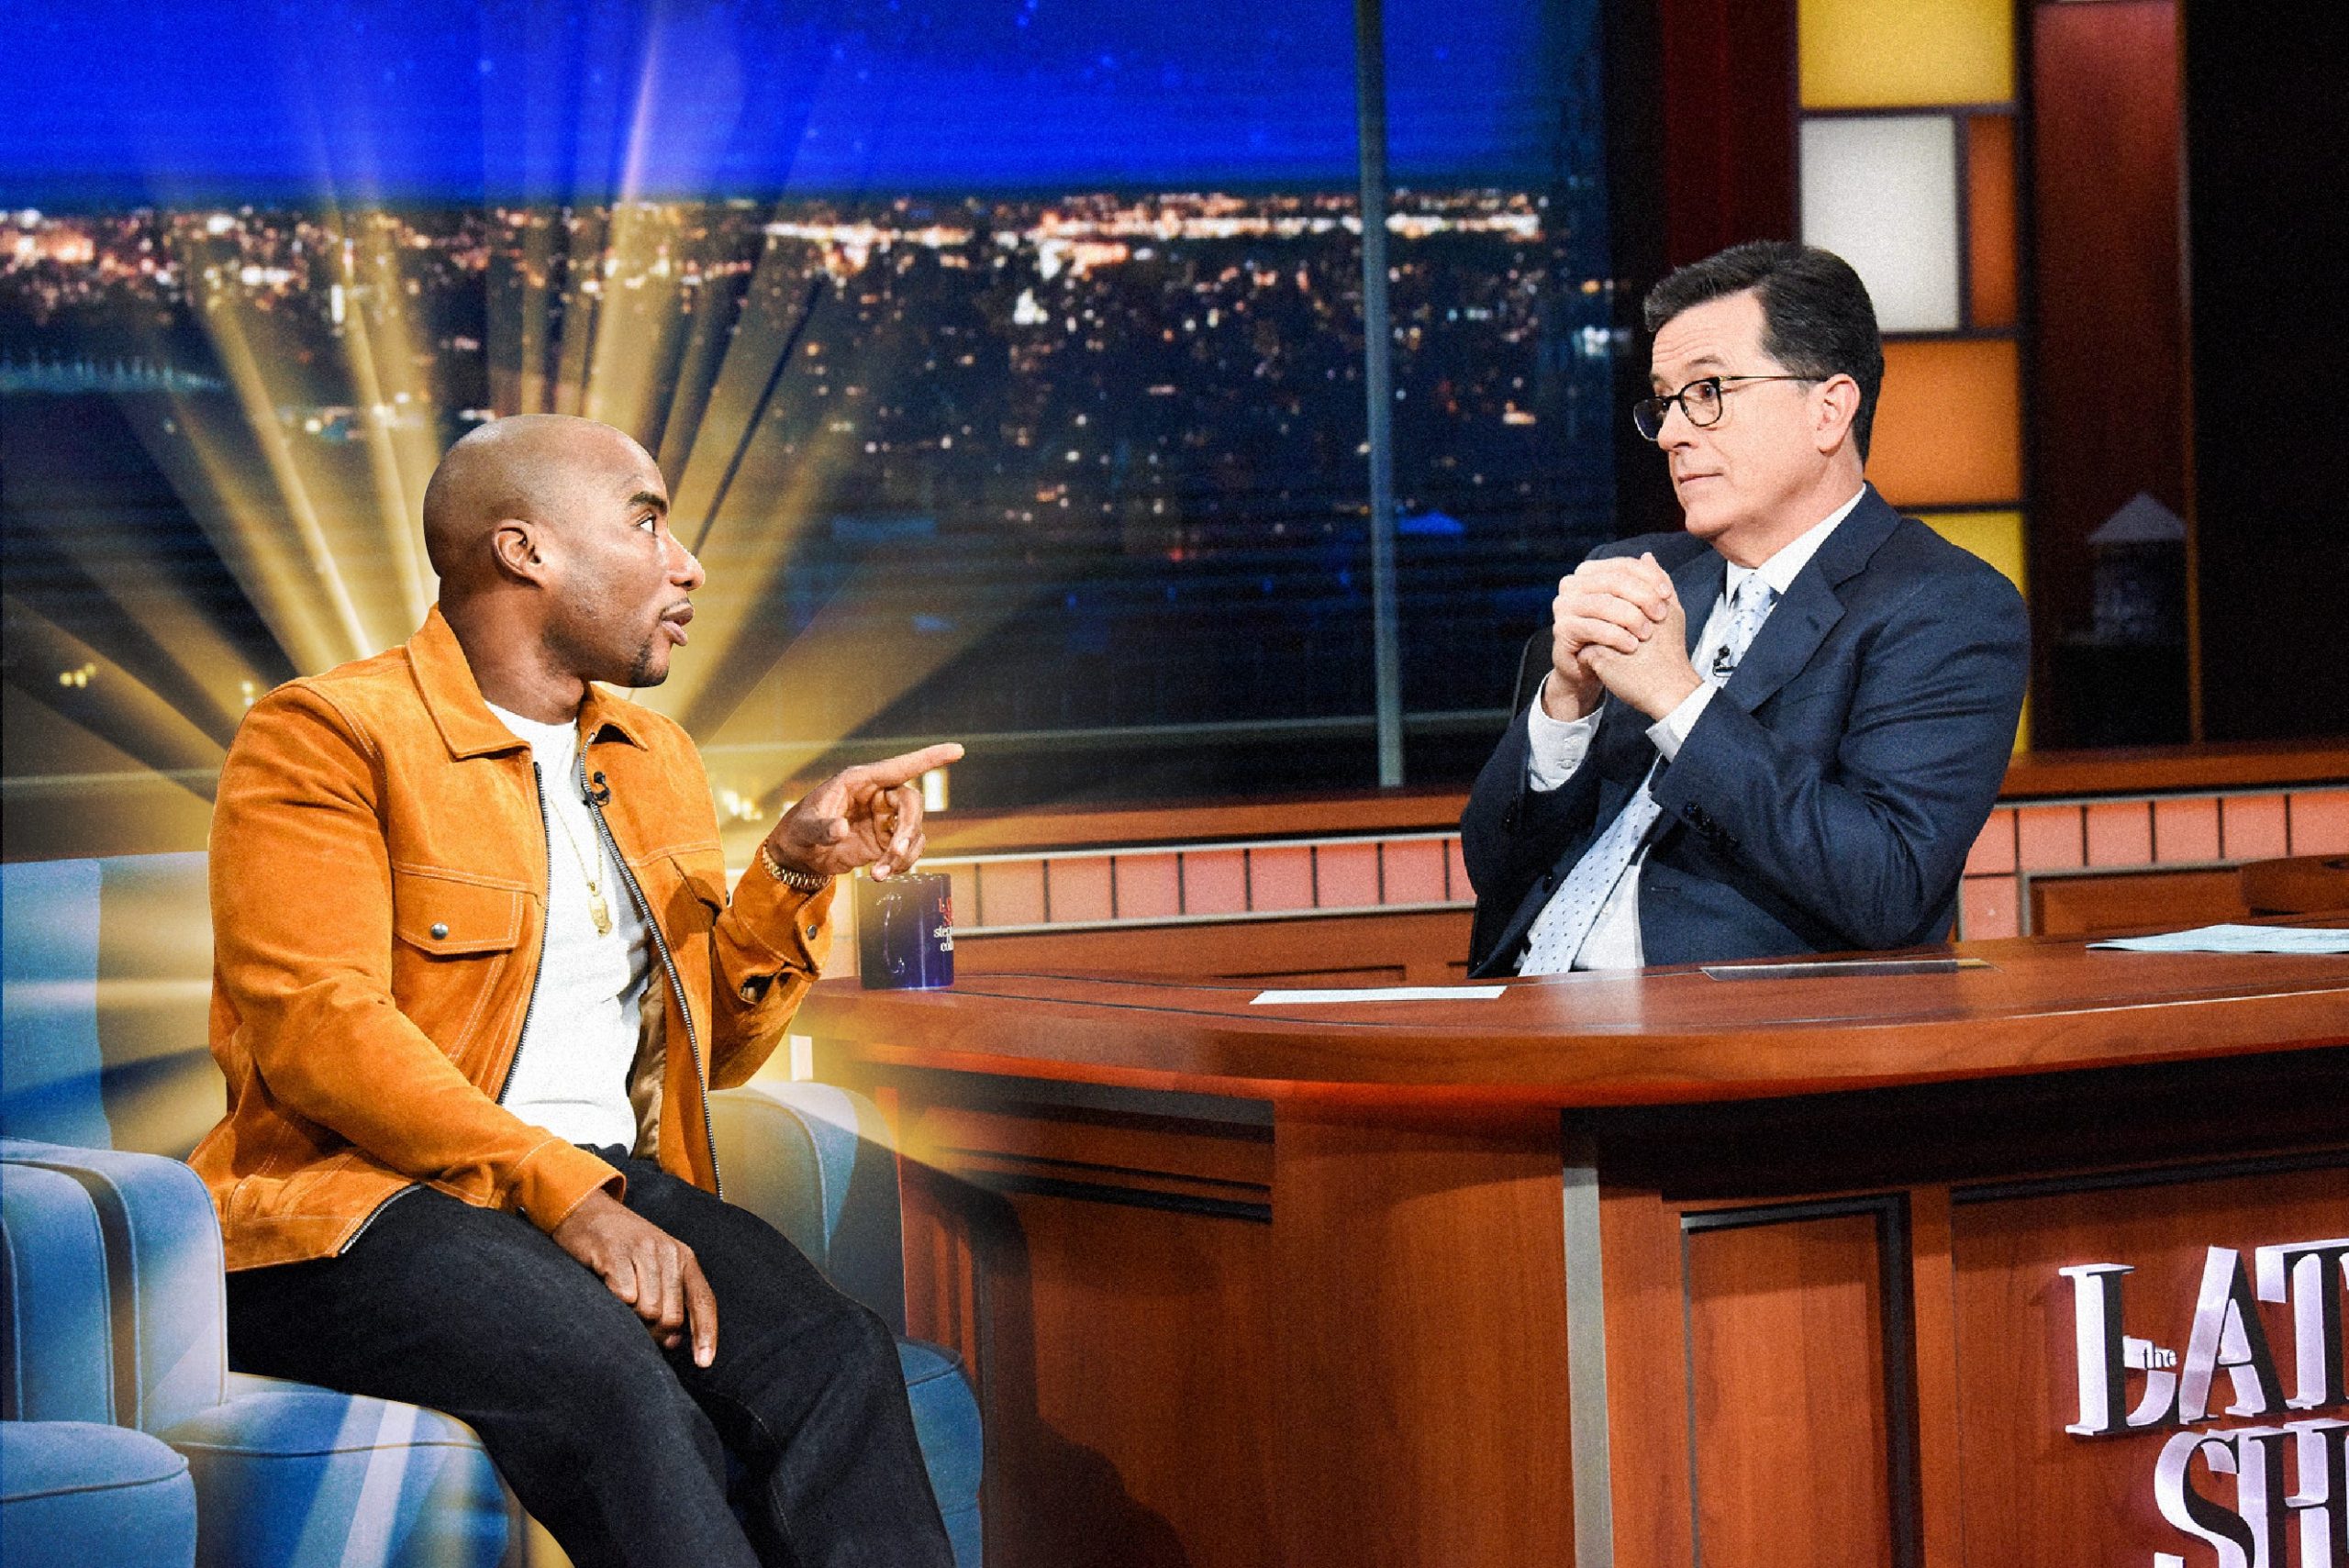 Charlamagne Tha God with a golden light radiation from behind him talking to Stephen Colbert, host of The Late Show..